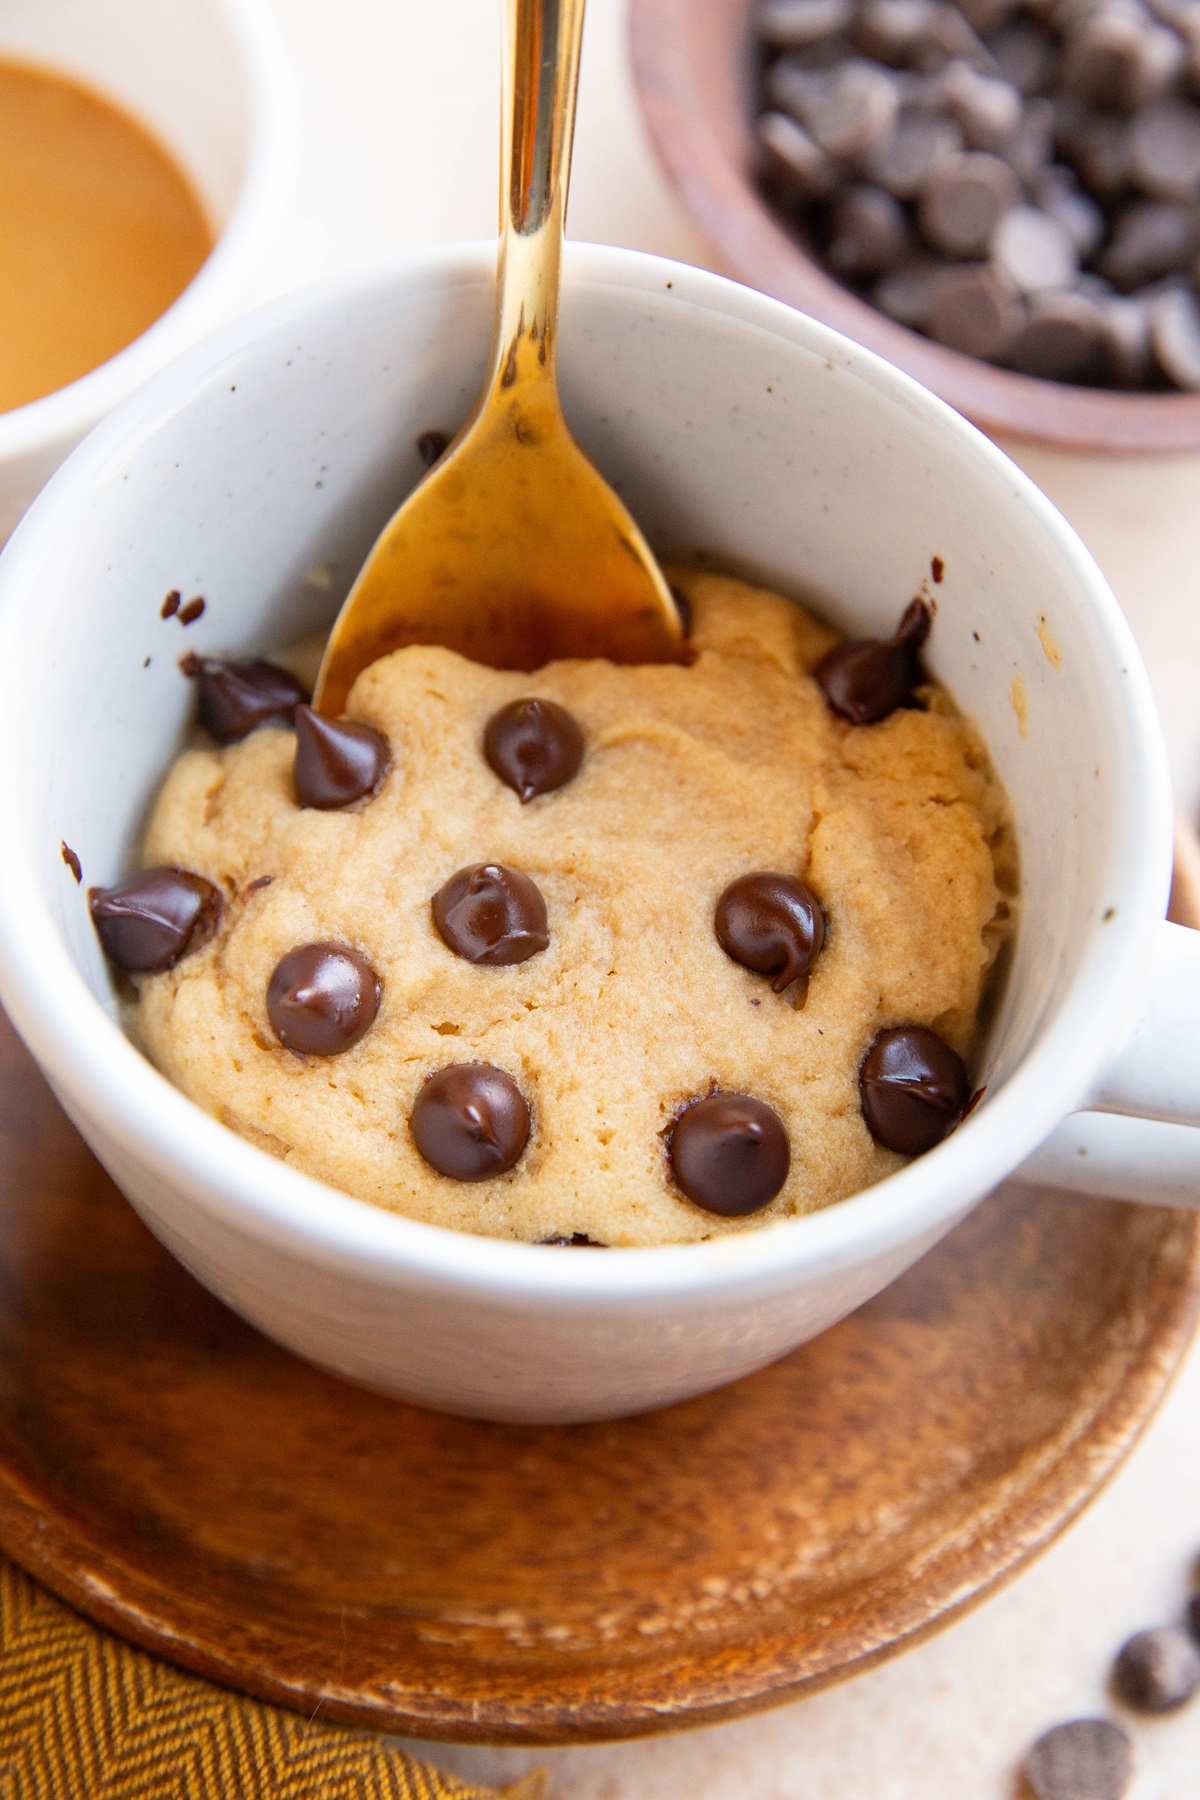 Peanut butter mug cake with chocolate chips on top and a gold spoon. Chocolate chips and peanut butter in the background.